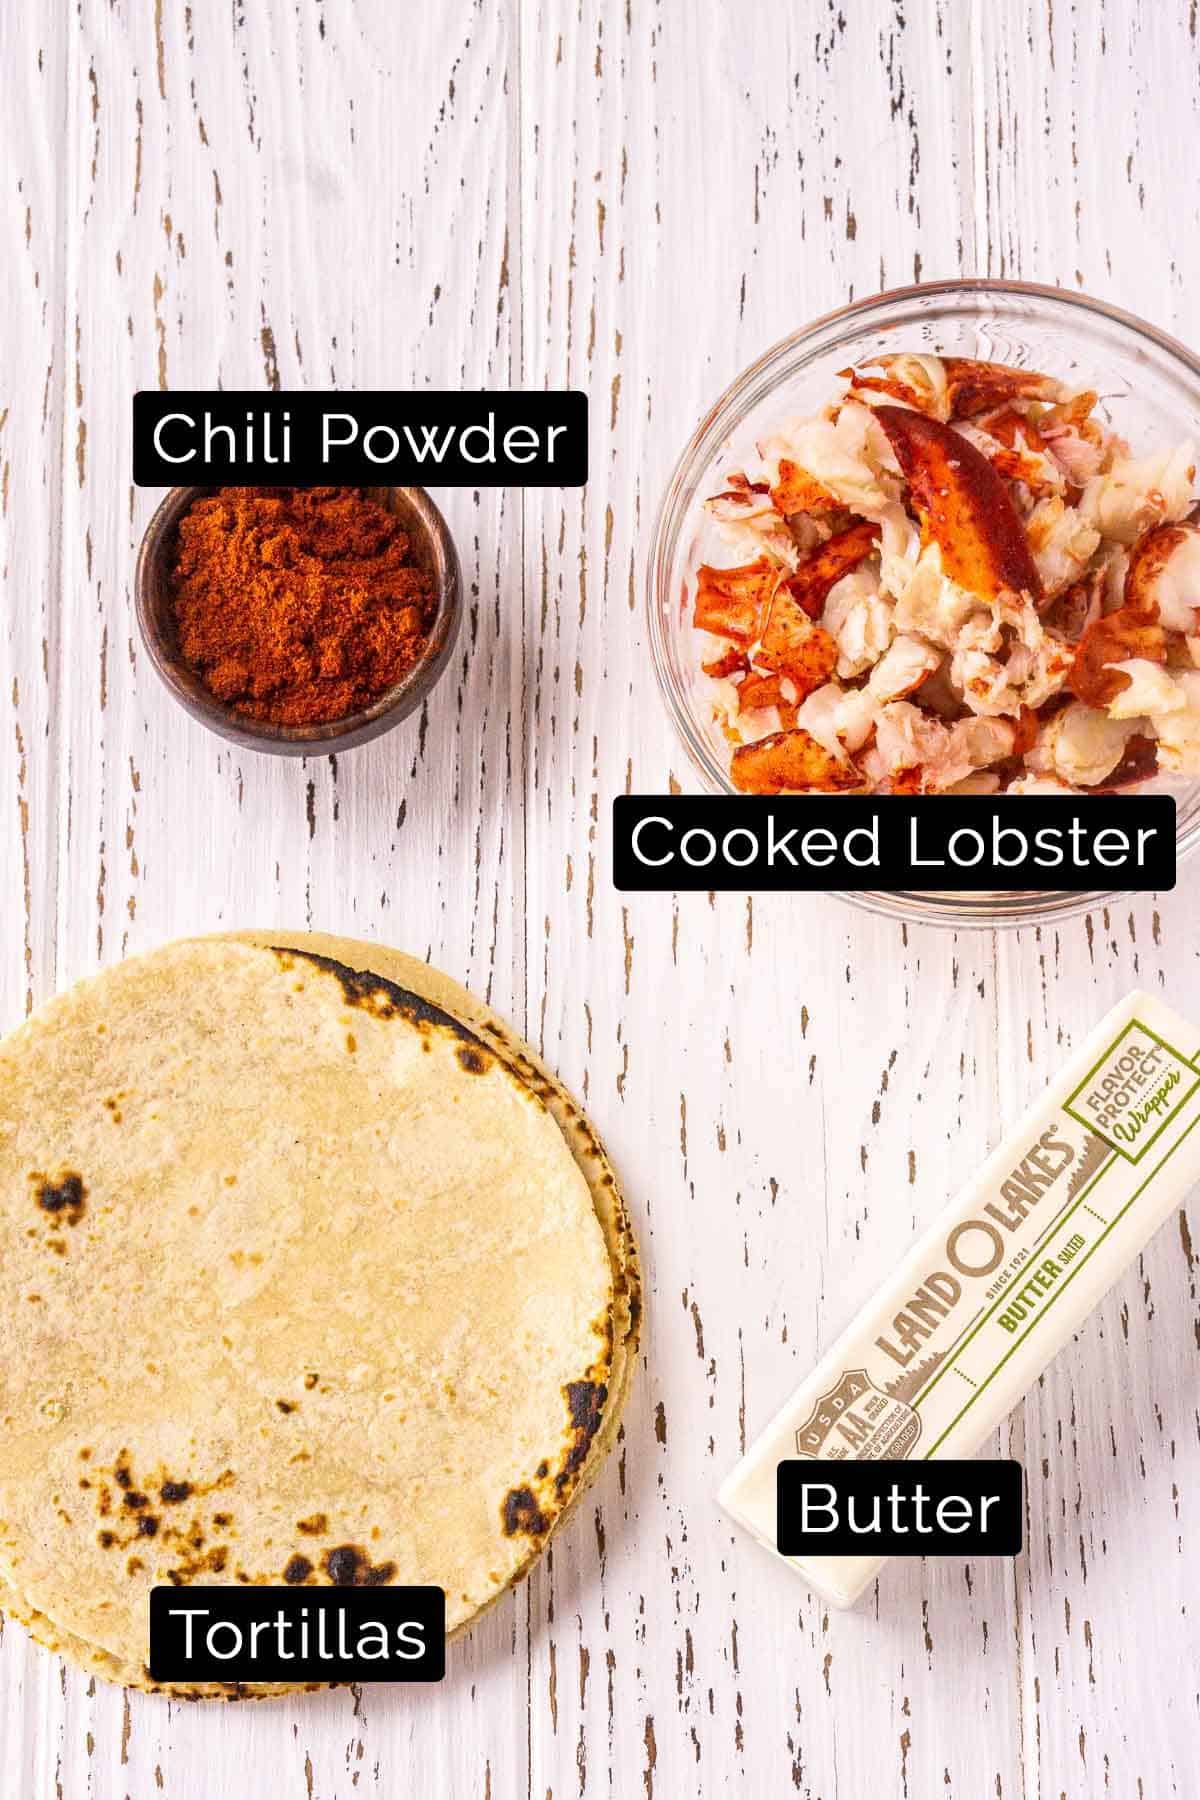 The lobster taco ingredients with black and white labels.